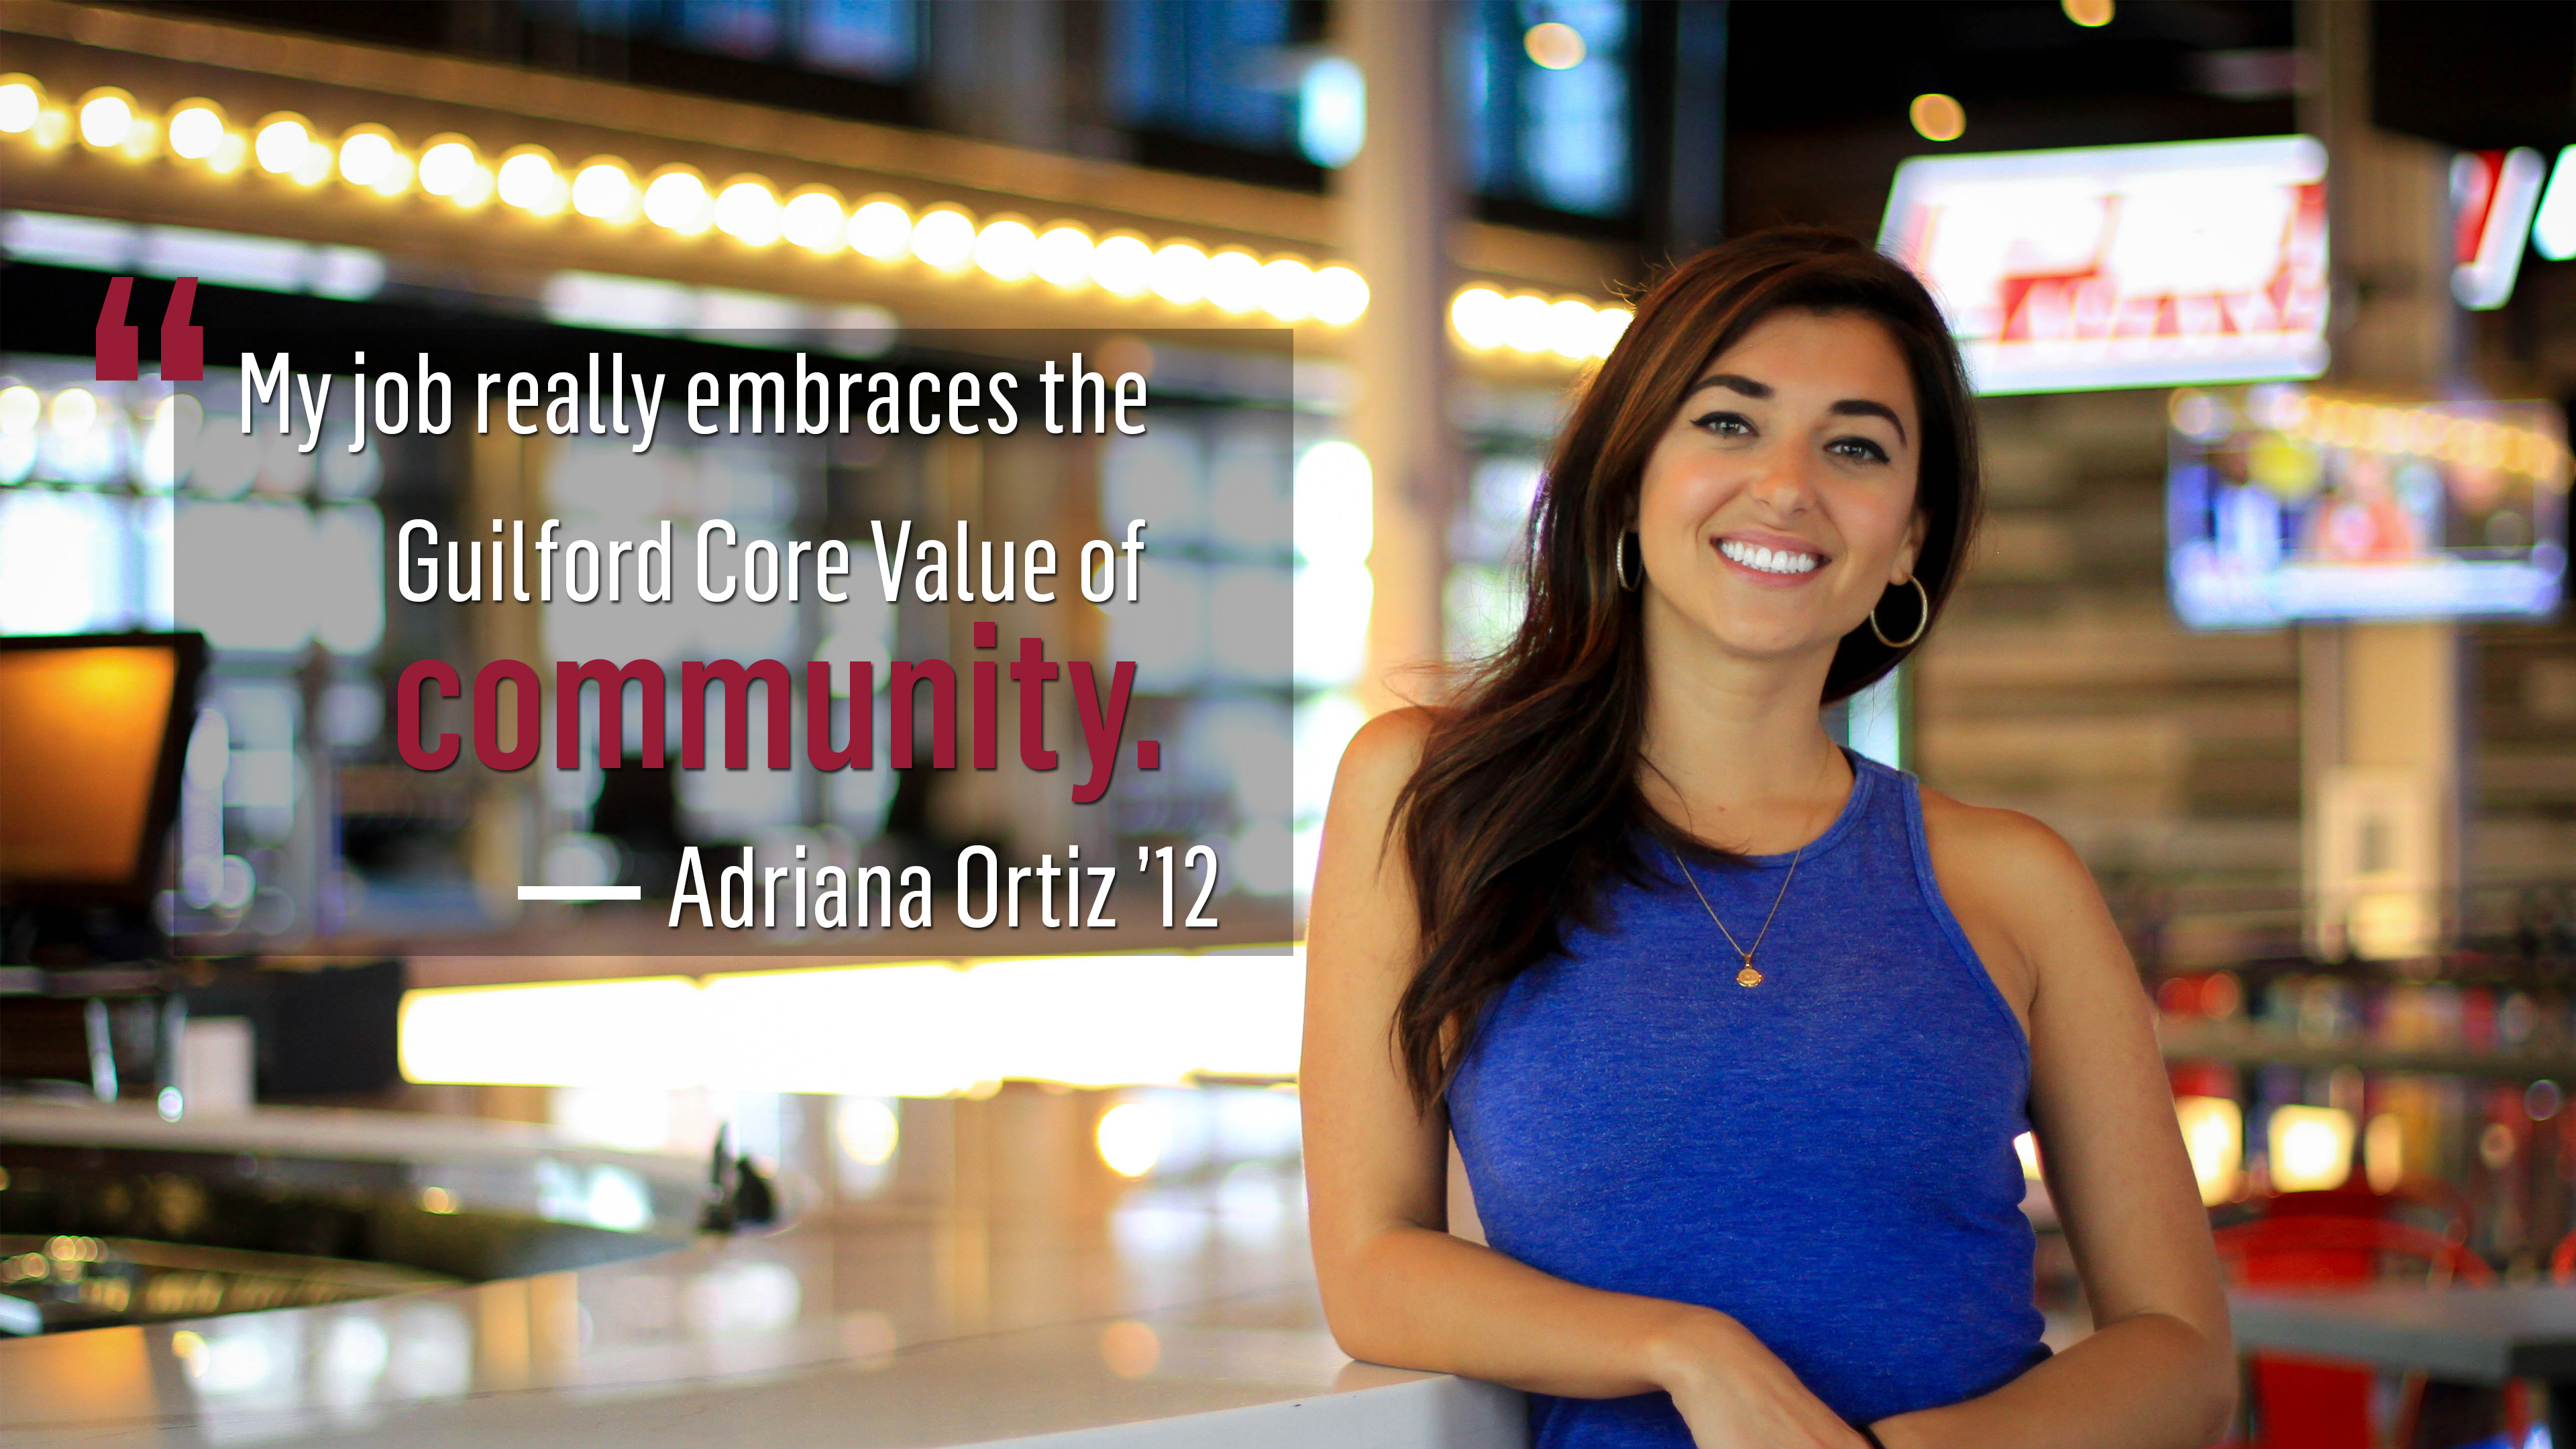 Portrait of alumna Adrian Ortiz '12 with the quote, "My job really embraces the Guilford Core Value of community."